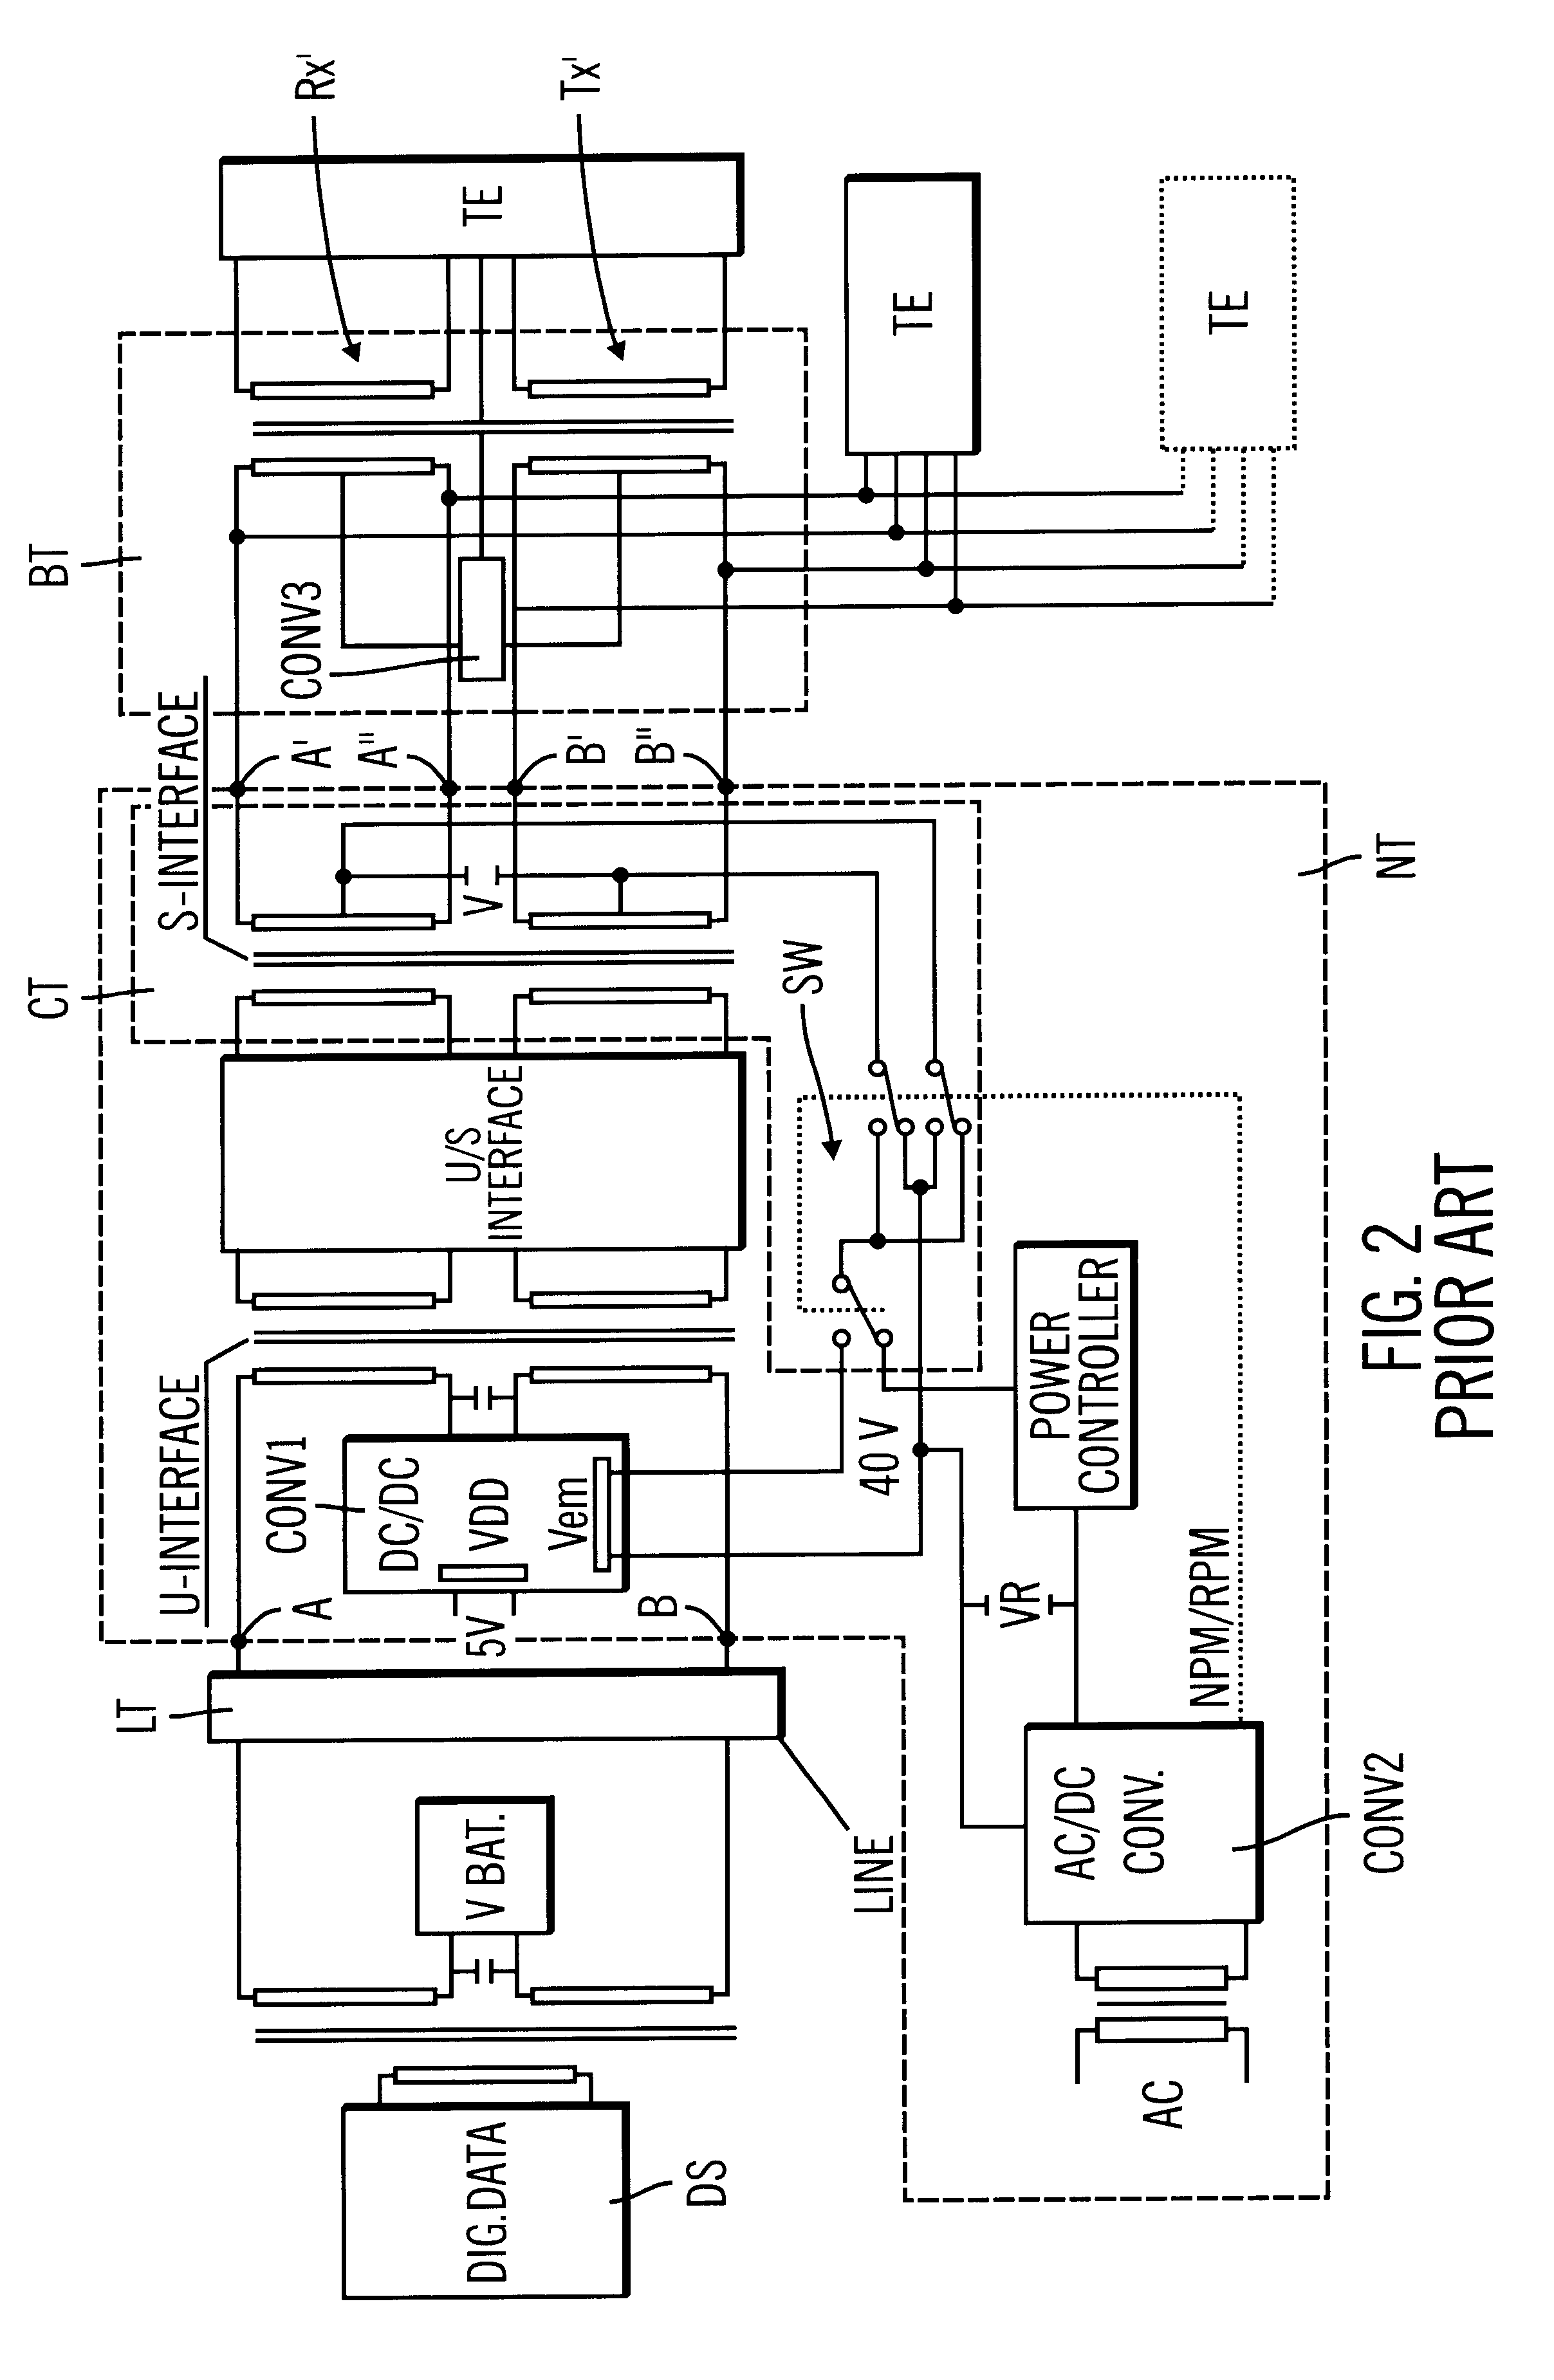 MOS transistors substitute circuit having a transformer/data interface function, particularly for ISDN networks and corresponding control and driving switch configuration